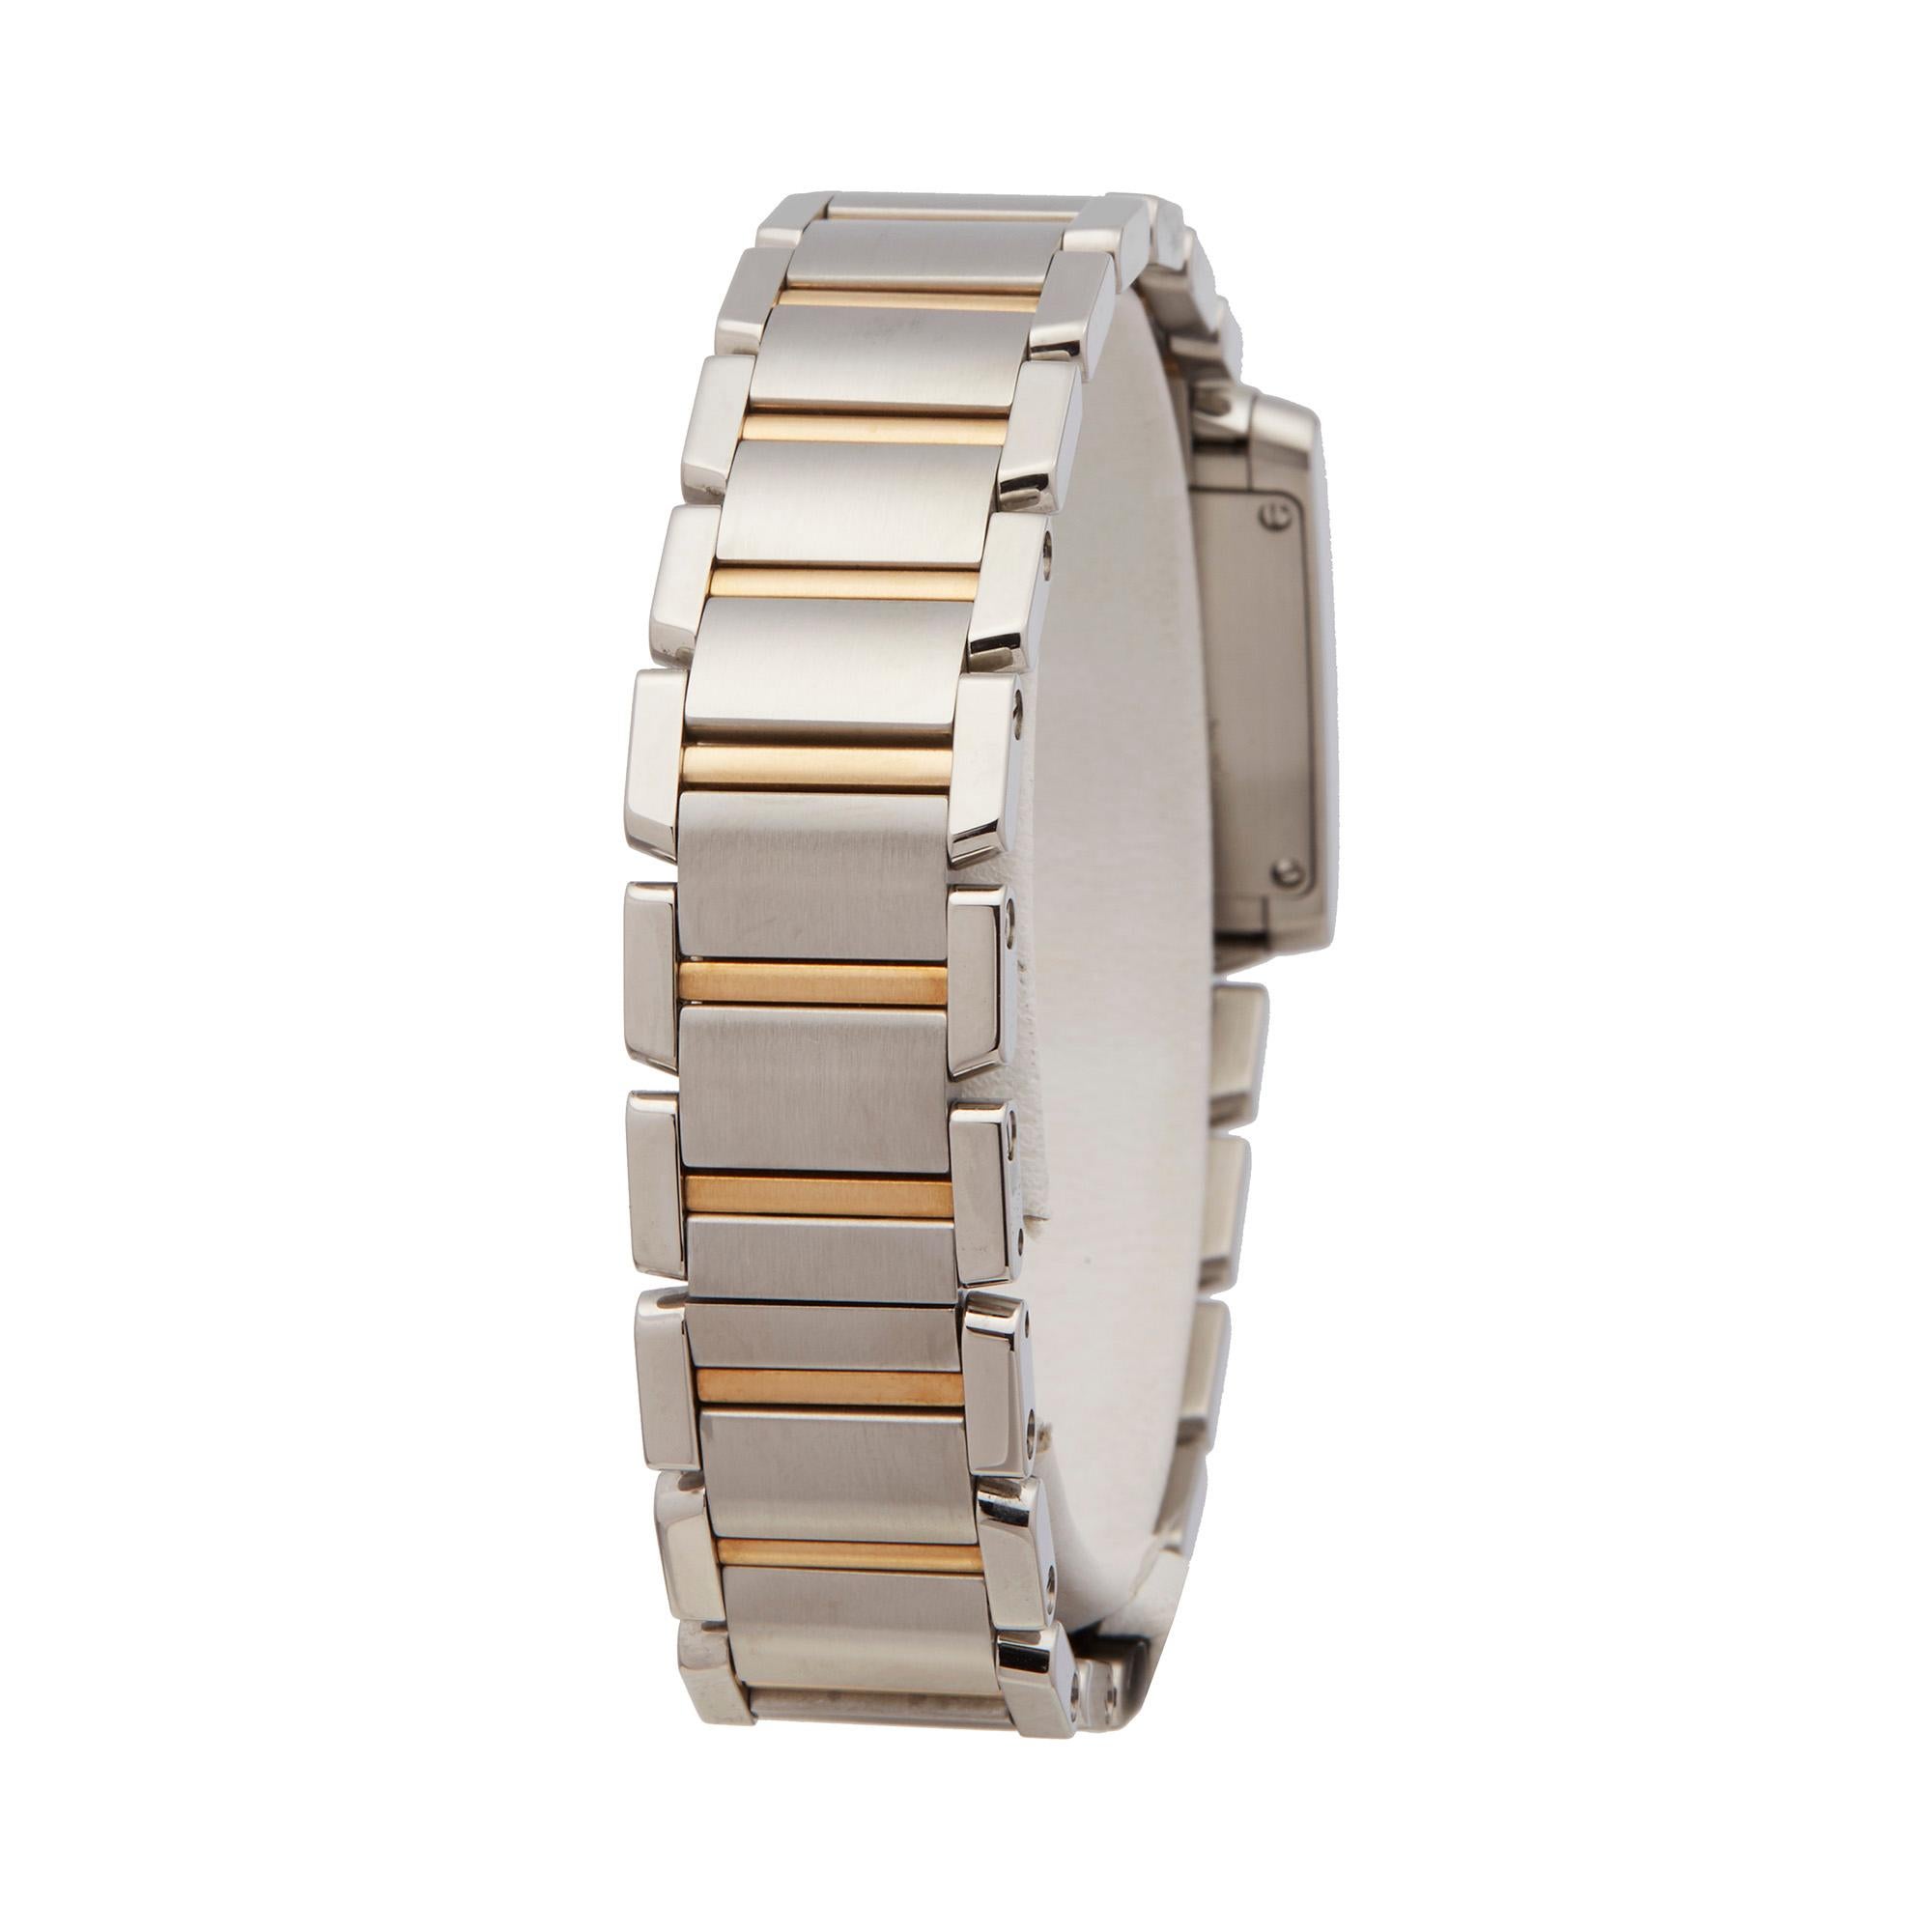 Cartier Tank Francaise Stainless Steel and 18K Yellow Gold 2384 1